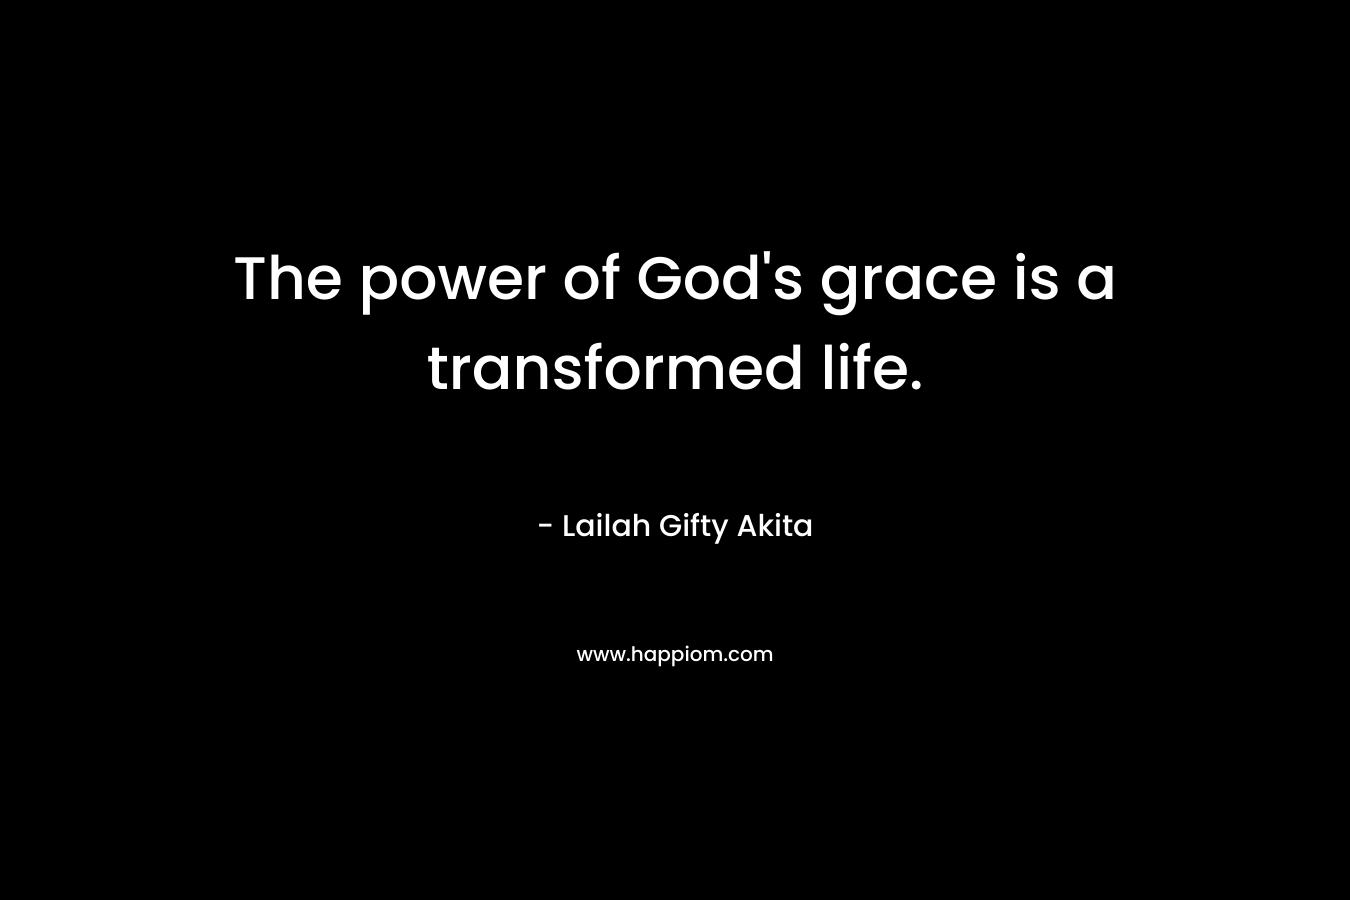 The power of God's grace is a transformed life.